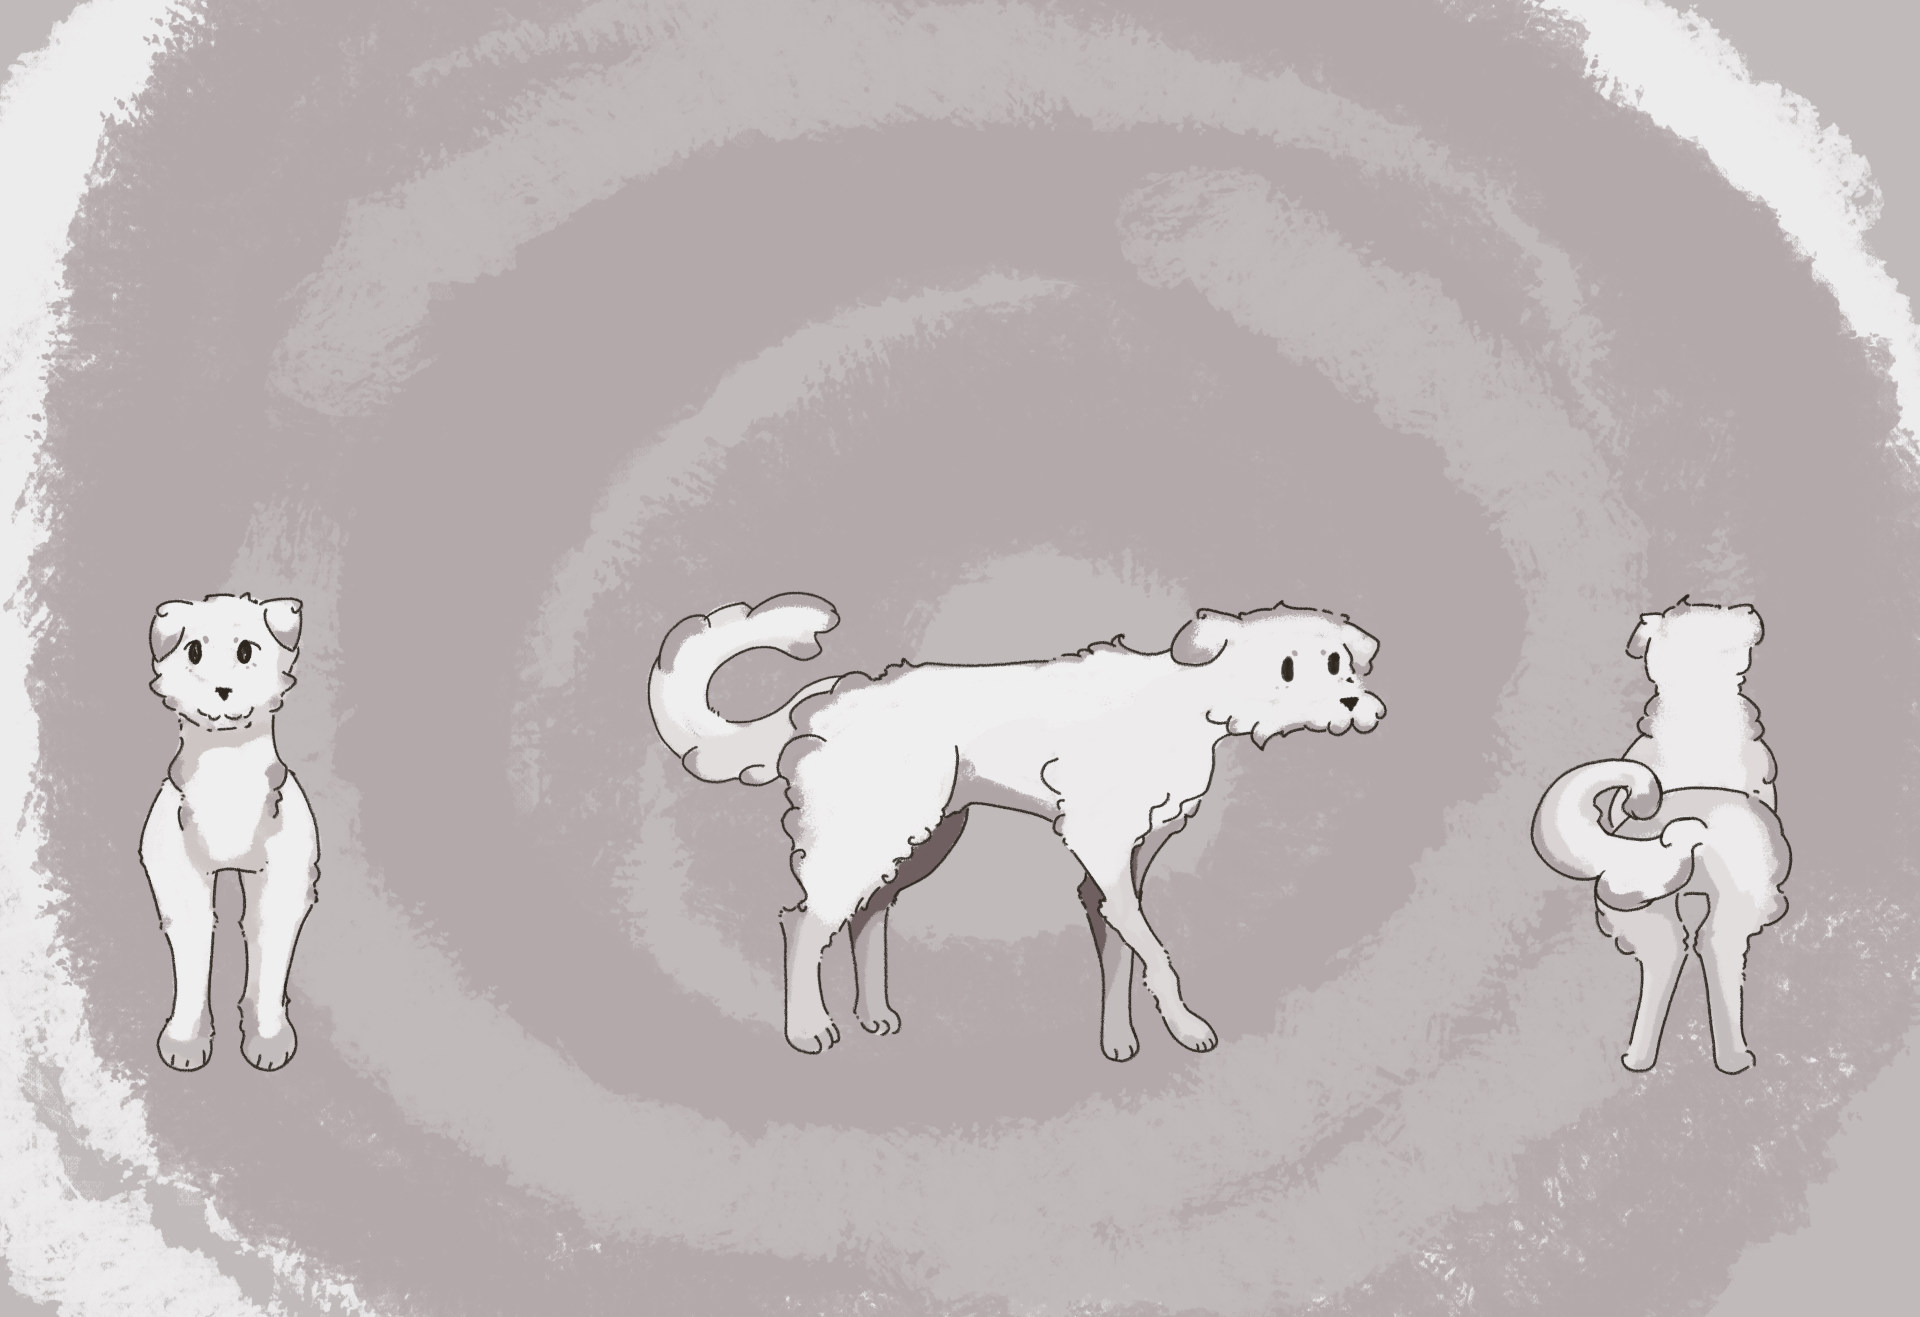 Illustrations of dog from three different angles